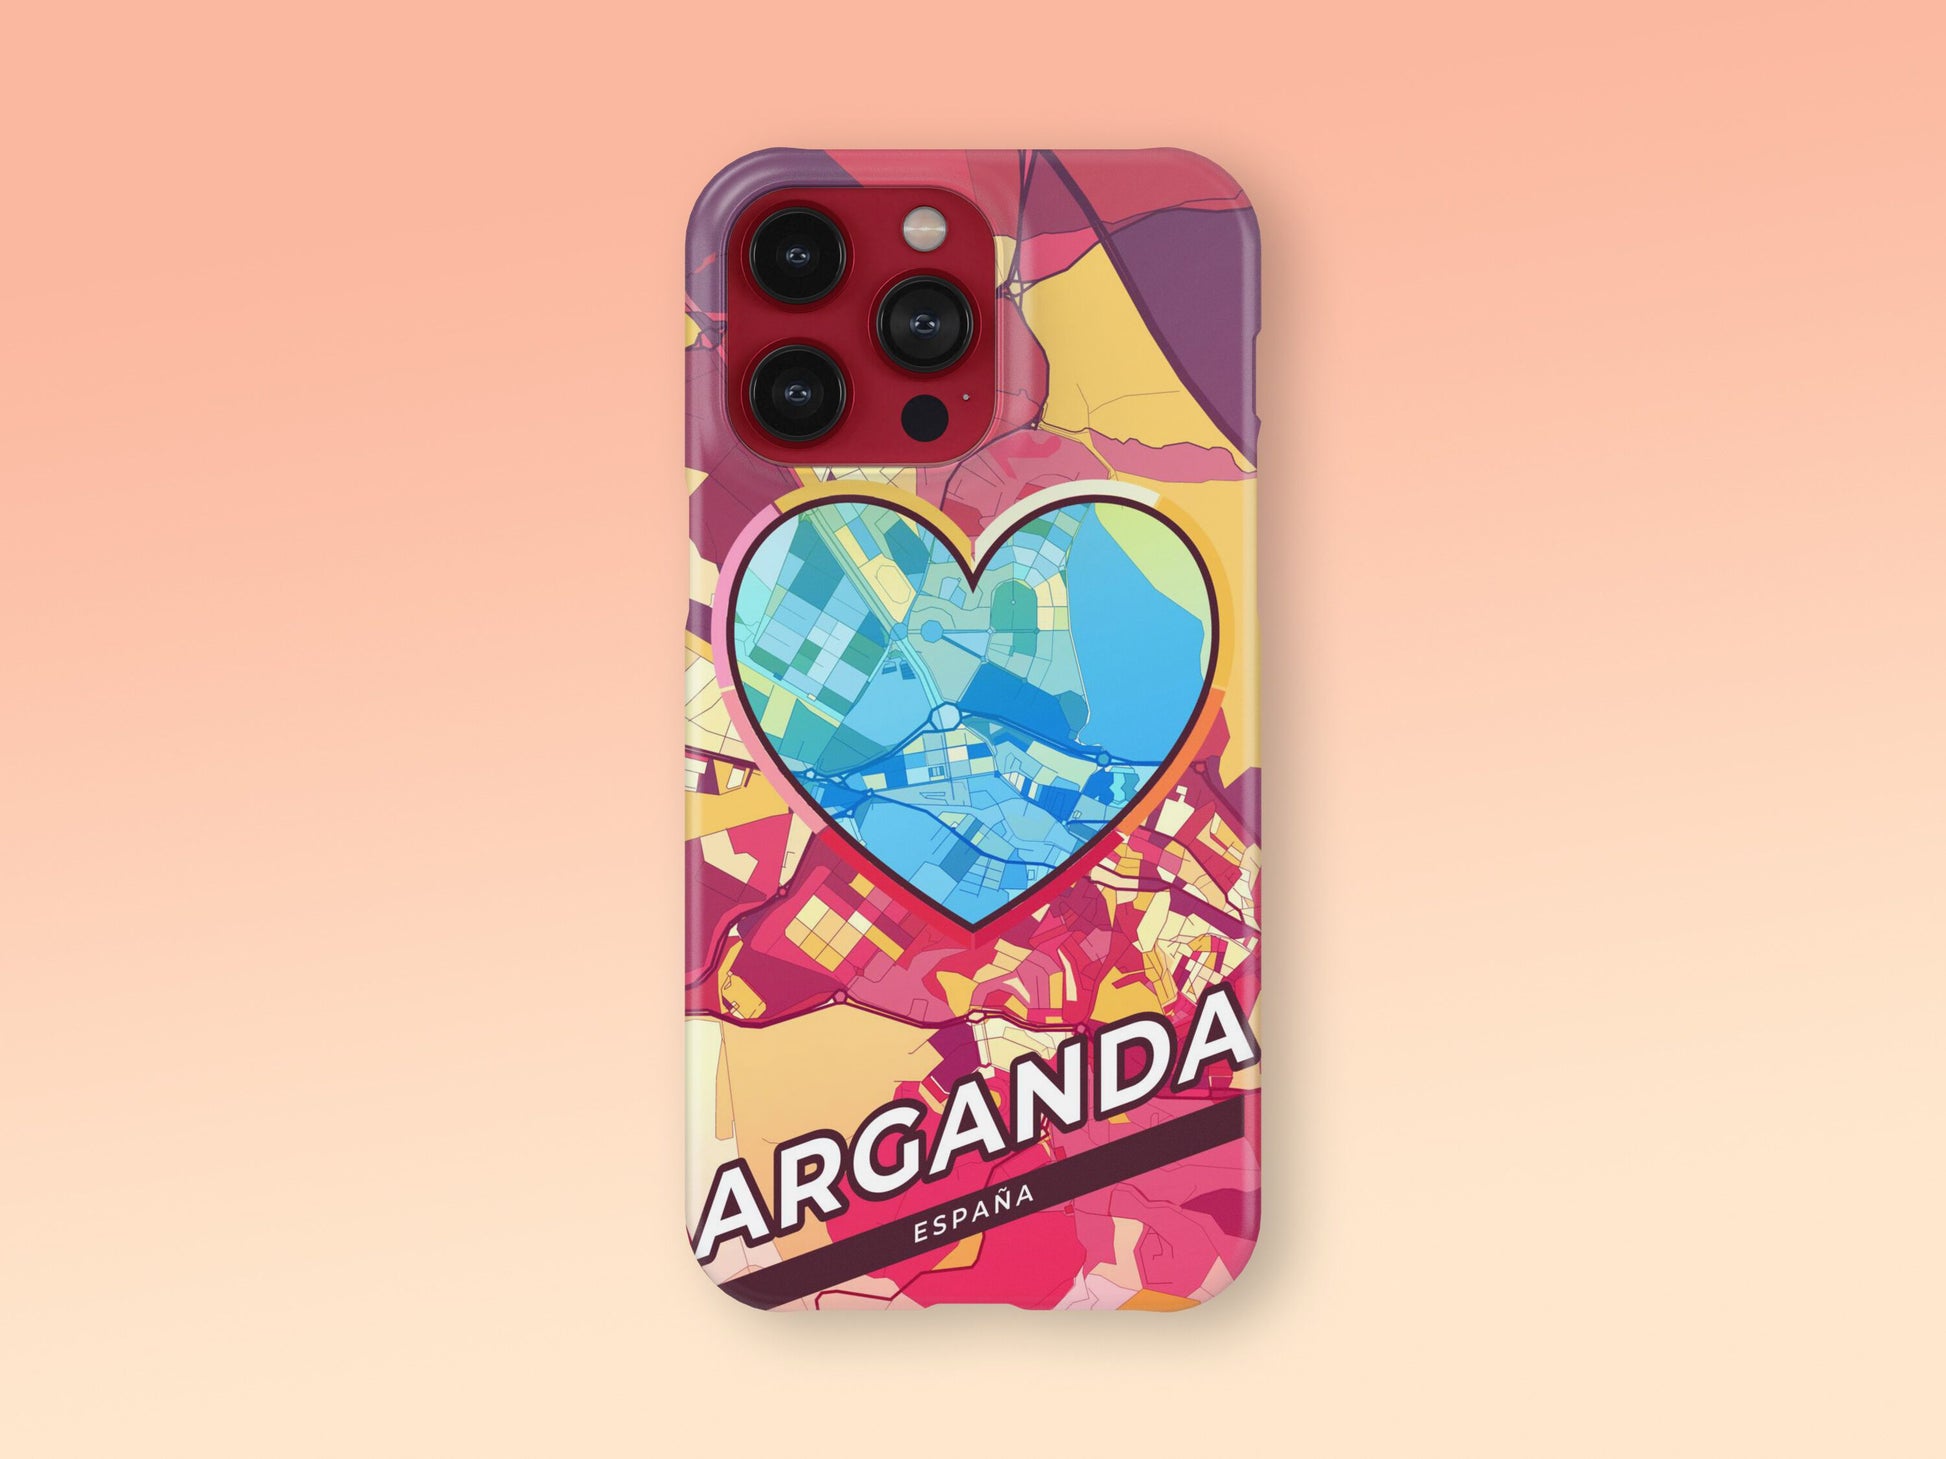 Arganda Spain slim phone case with colorful icon. Birthday, wedding or housewarming gift. Couple match cases. 2